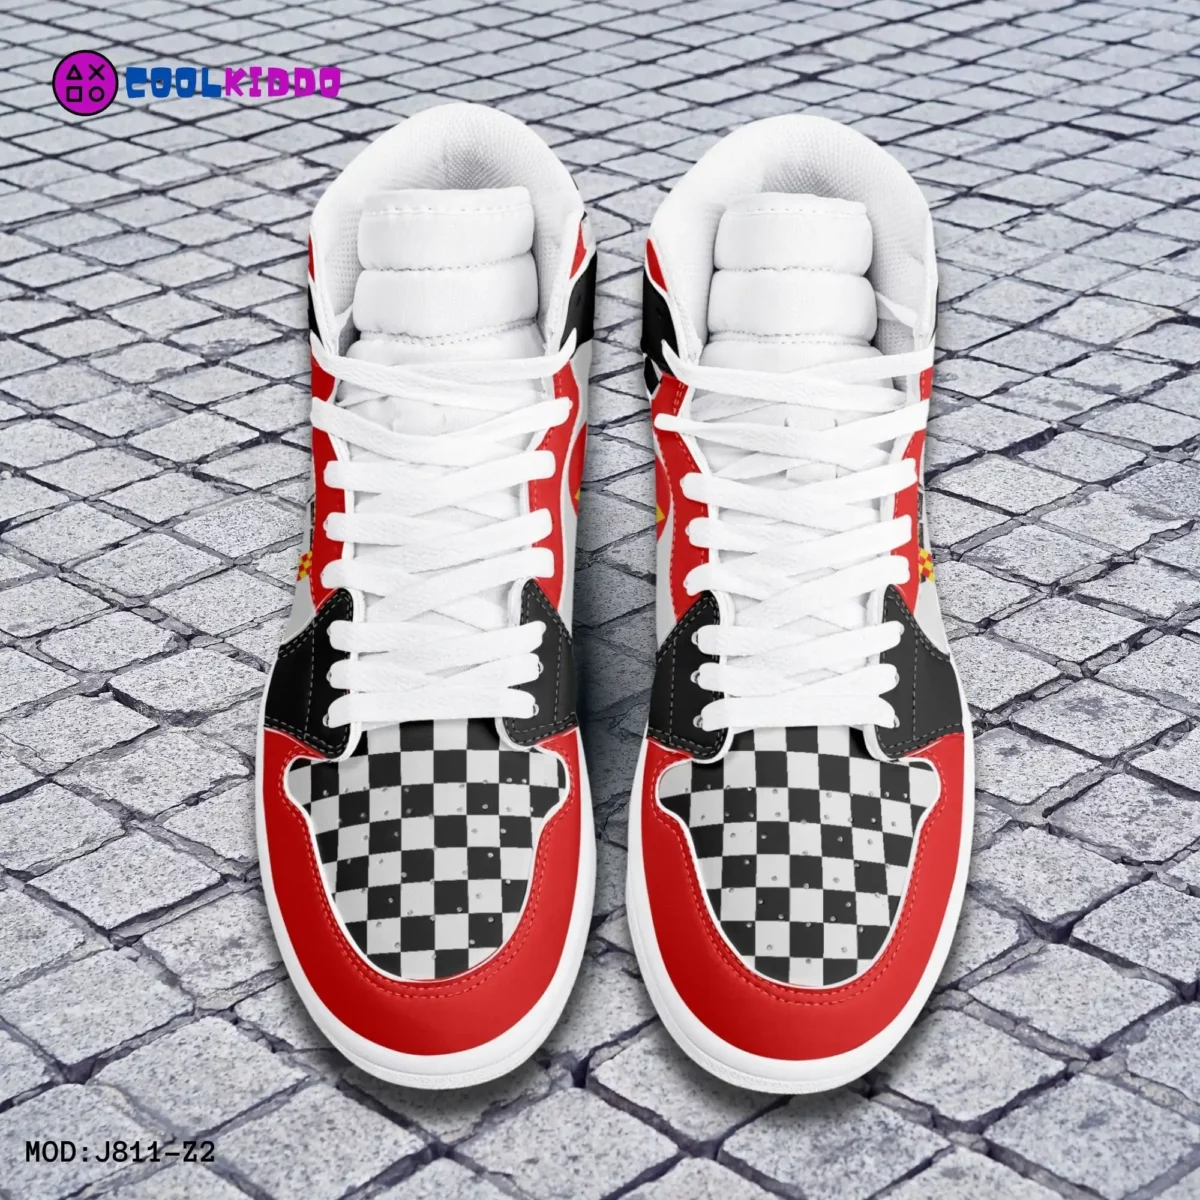 Custom Speed Racer Character High-Top Leather Sneakers Cool Kiddo 18